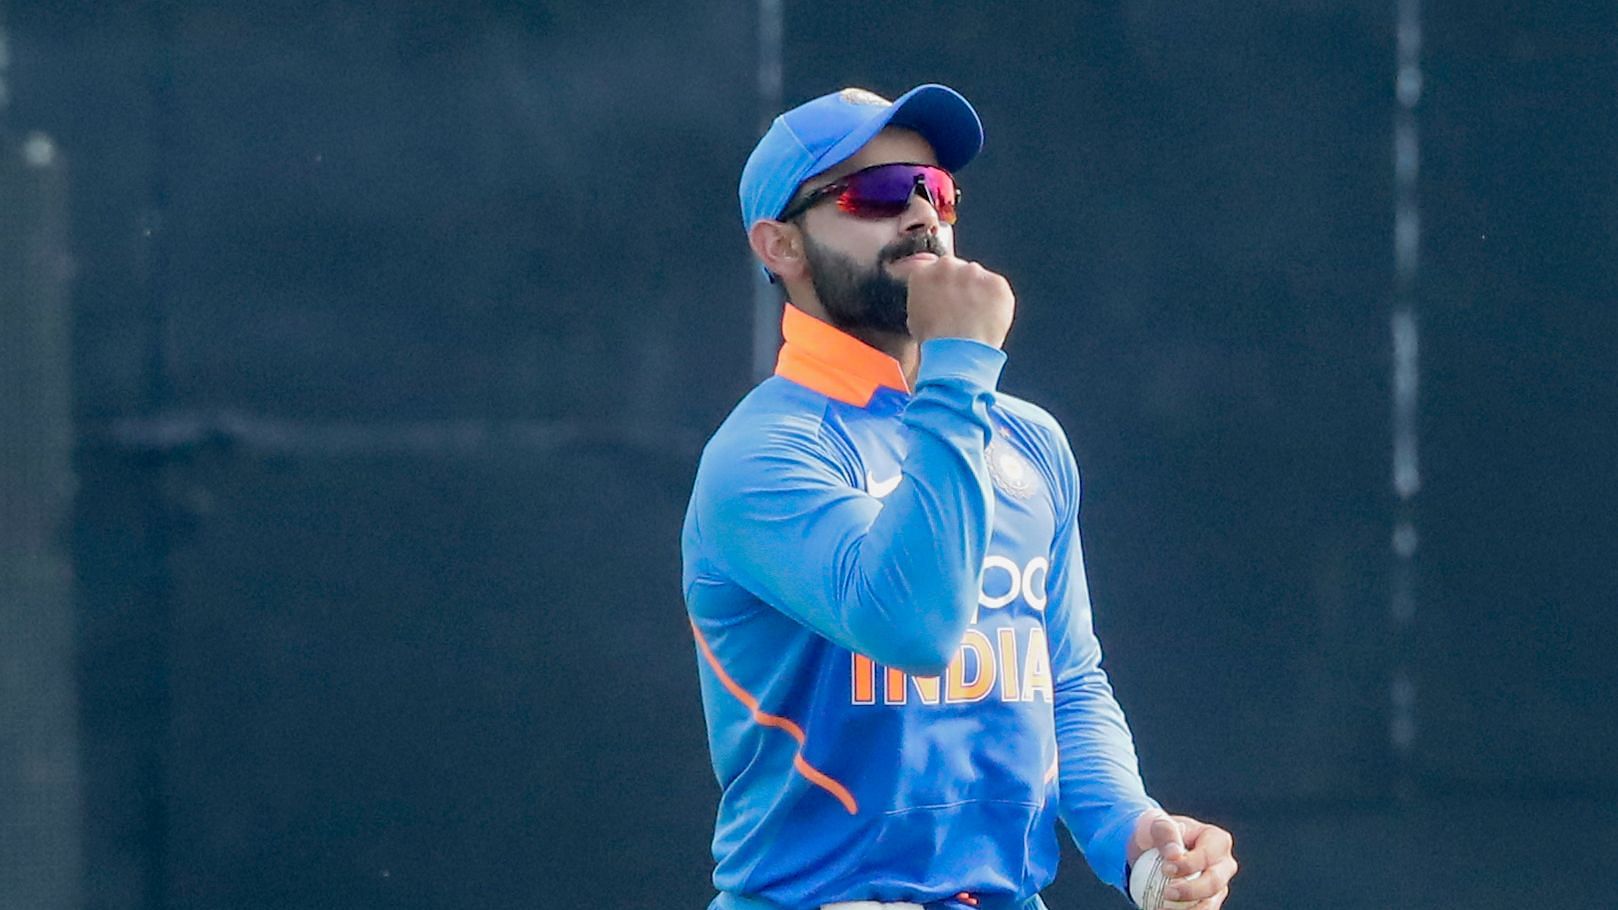 India captain Virat Kohli celebrates after a catch to dismiss West Indies Shimron Hetmyer for 18 runs during their second One-Day International cricket match in Port of Spain, Trinidad, Sunday, Aug. 11, 2019.&nbsp;